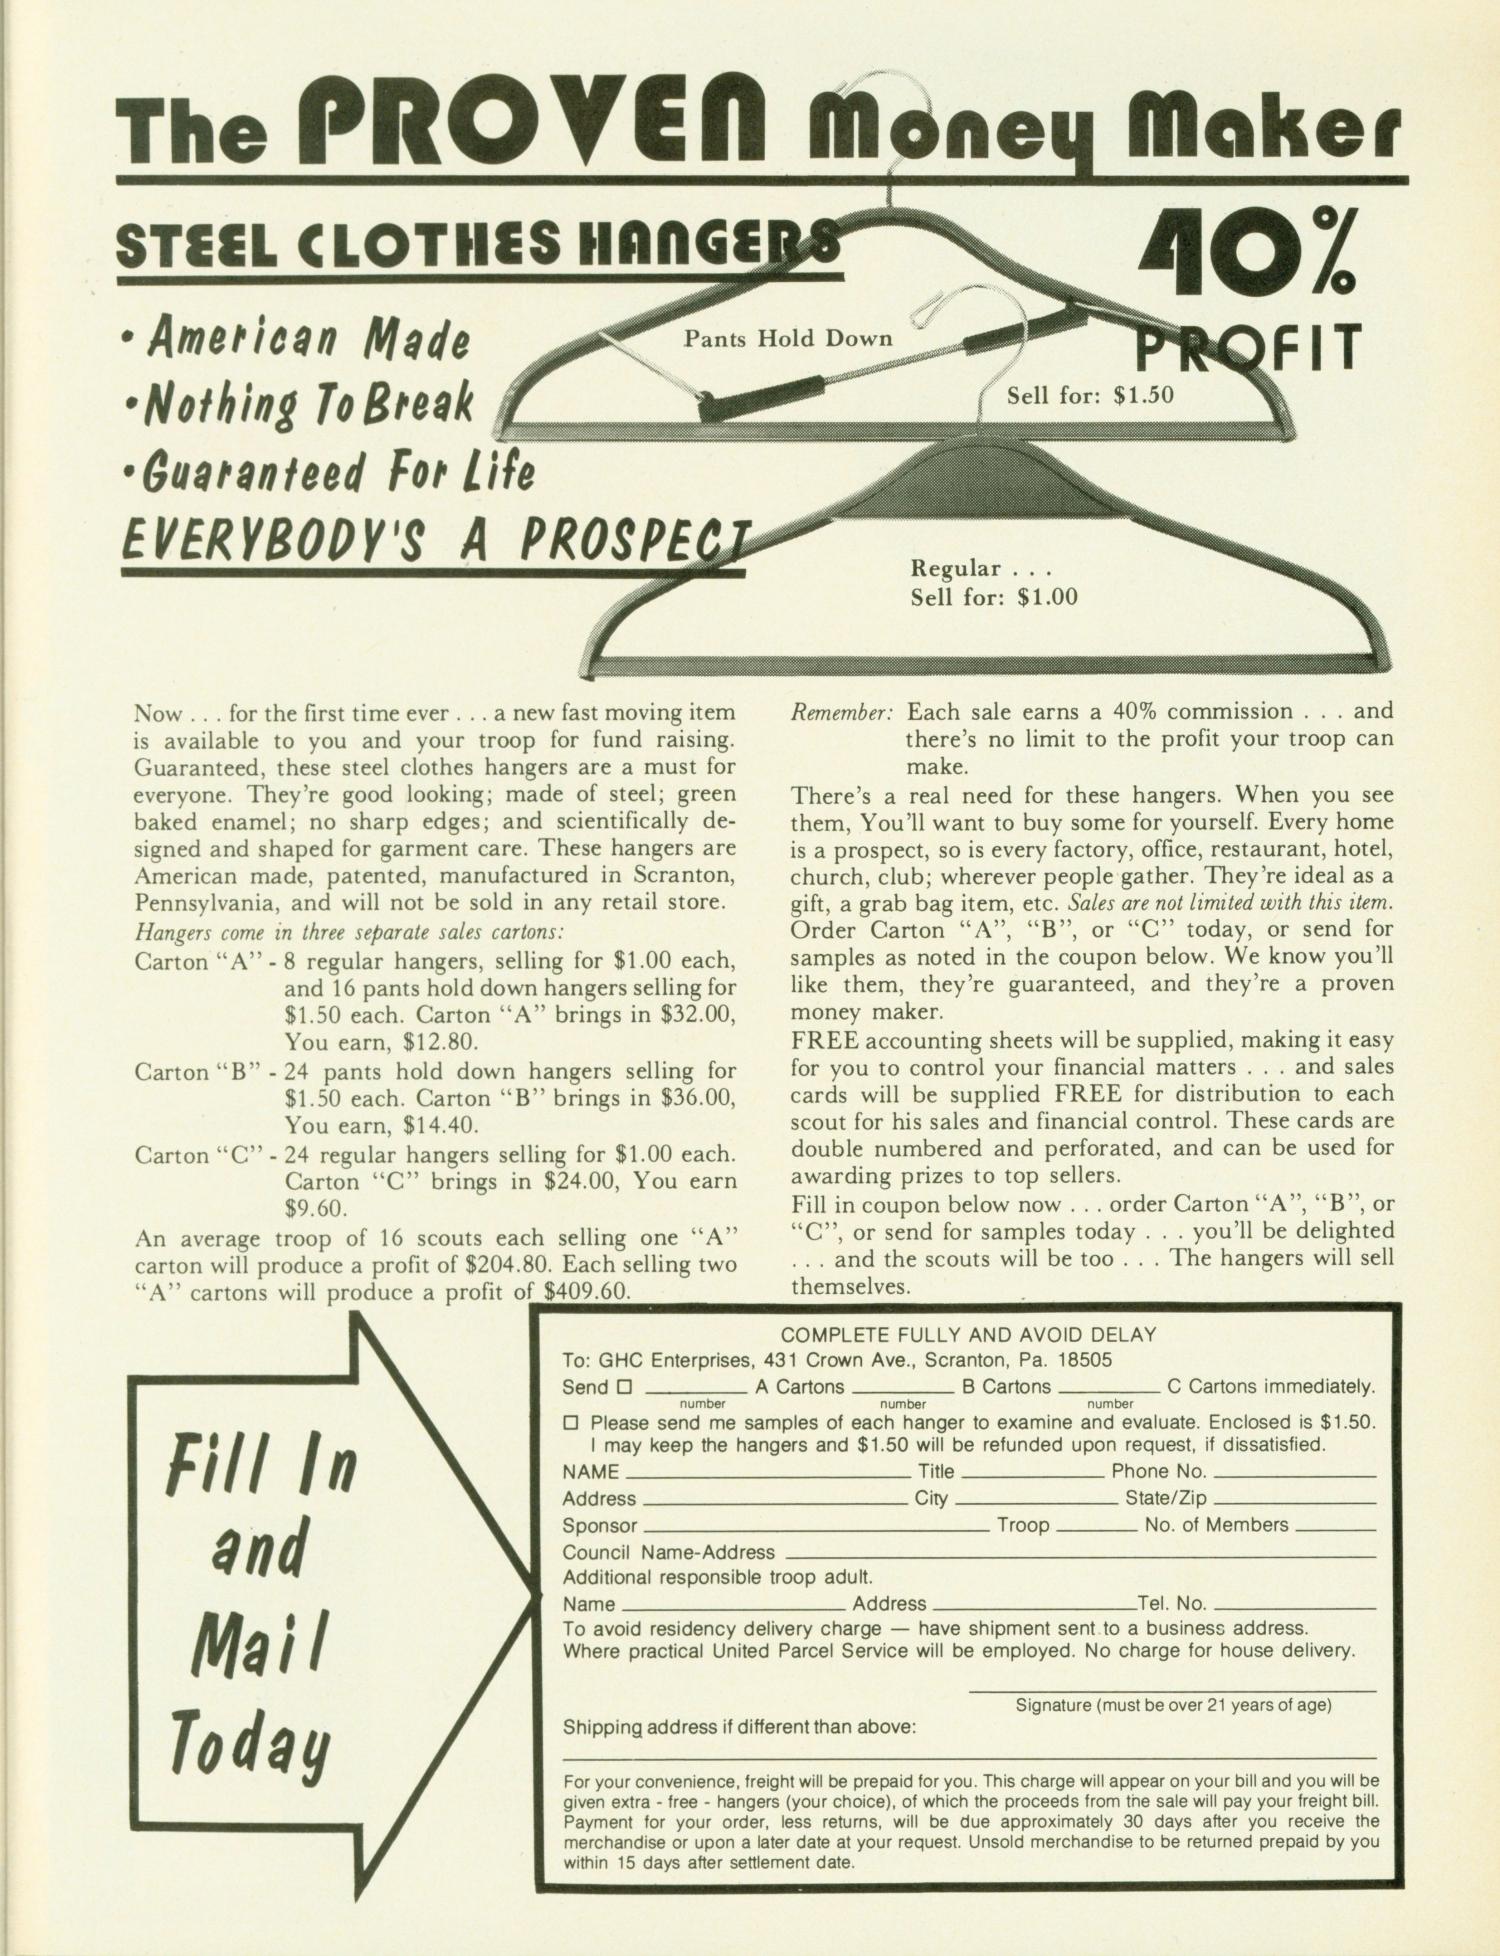 Scouting, Volume 64, Number 2, March-April 1976
                                                
                                                    21
                                                